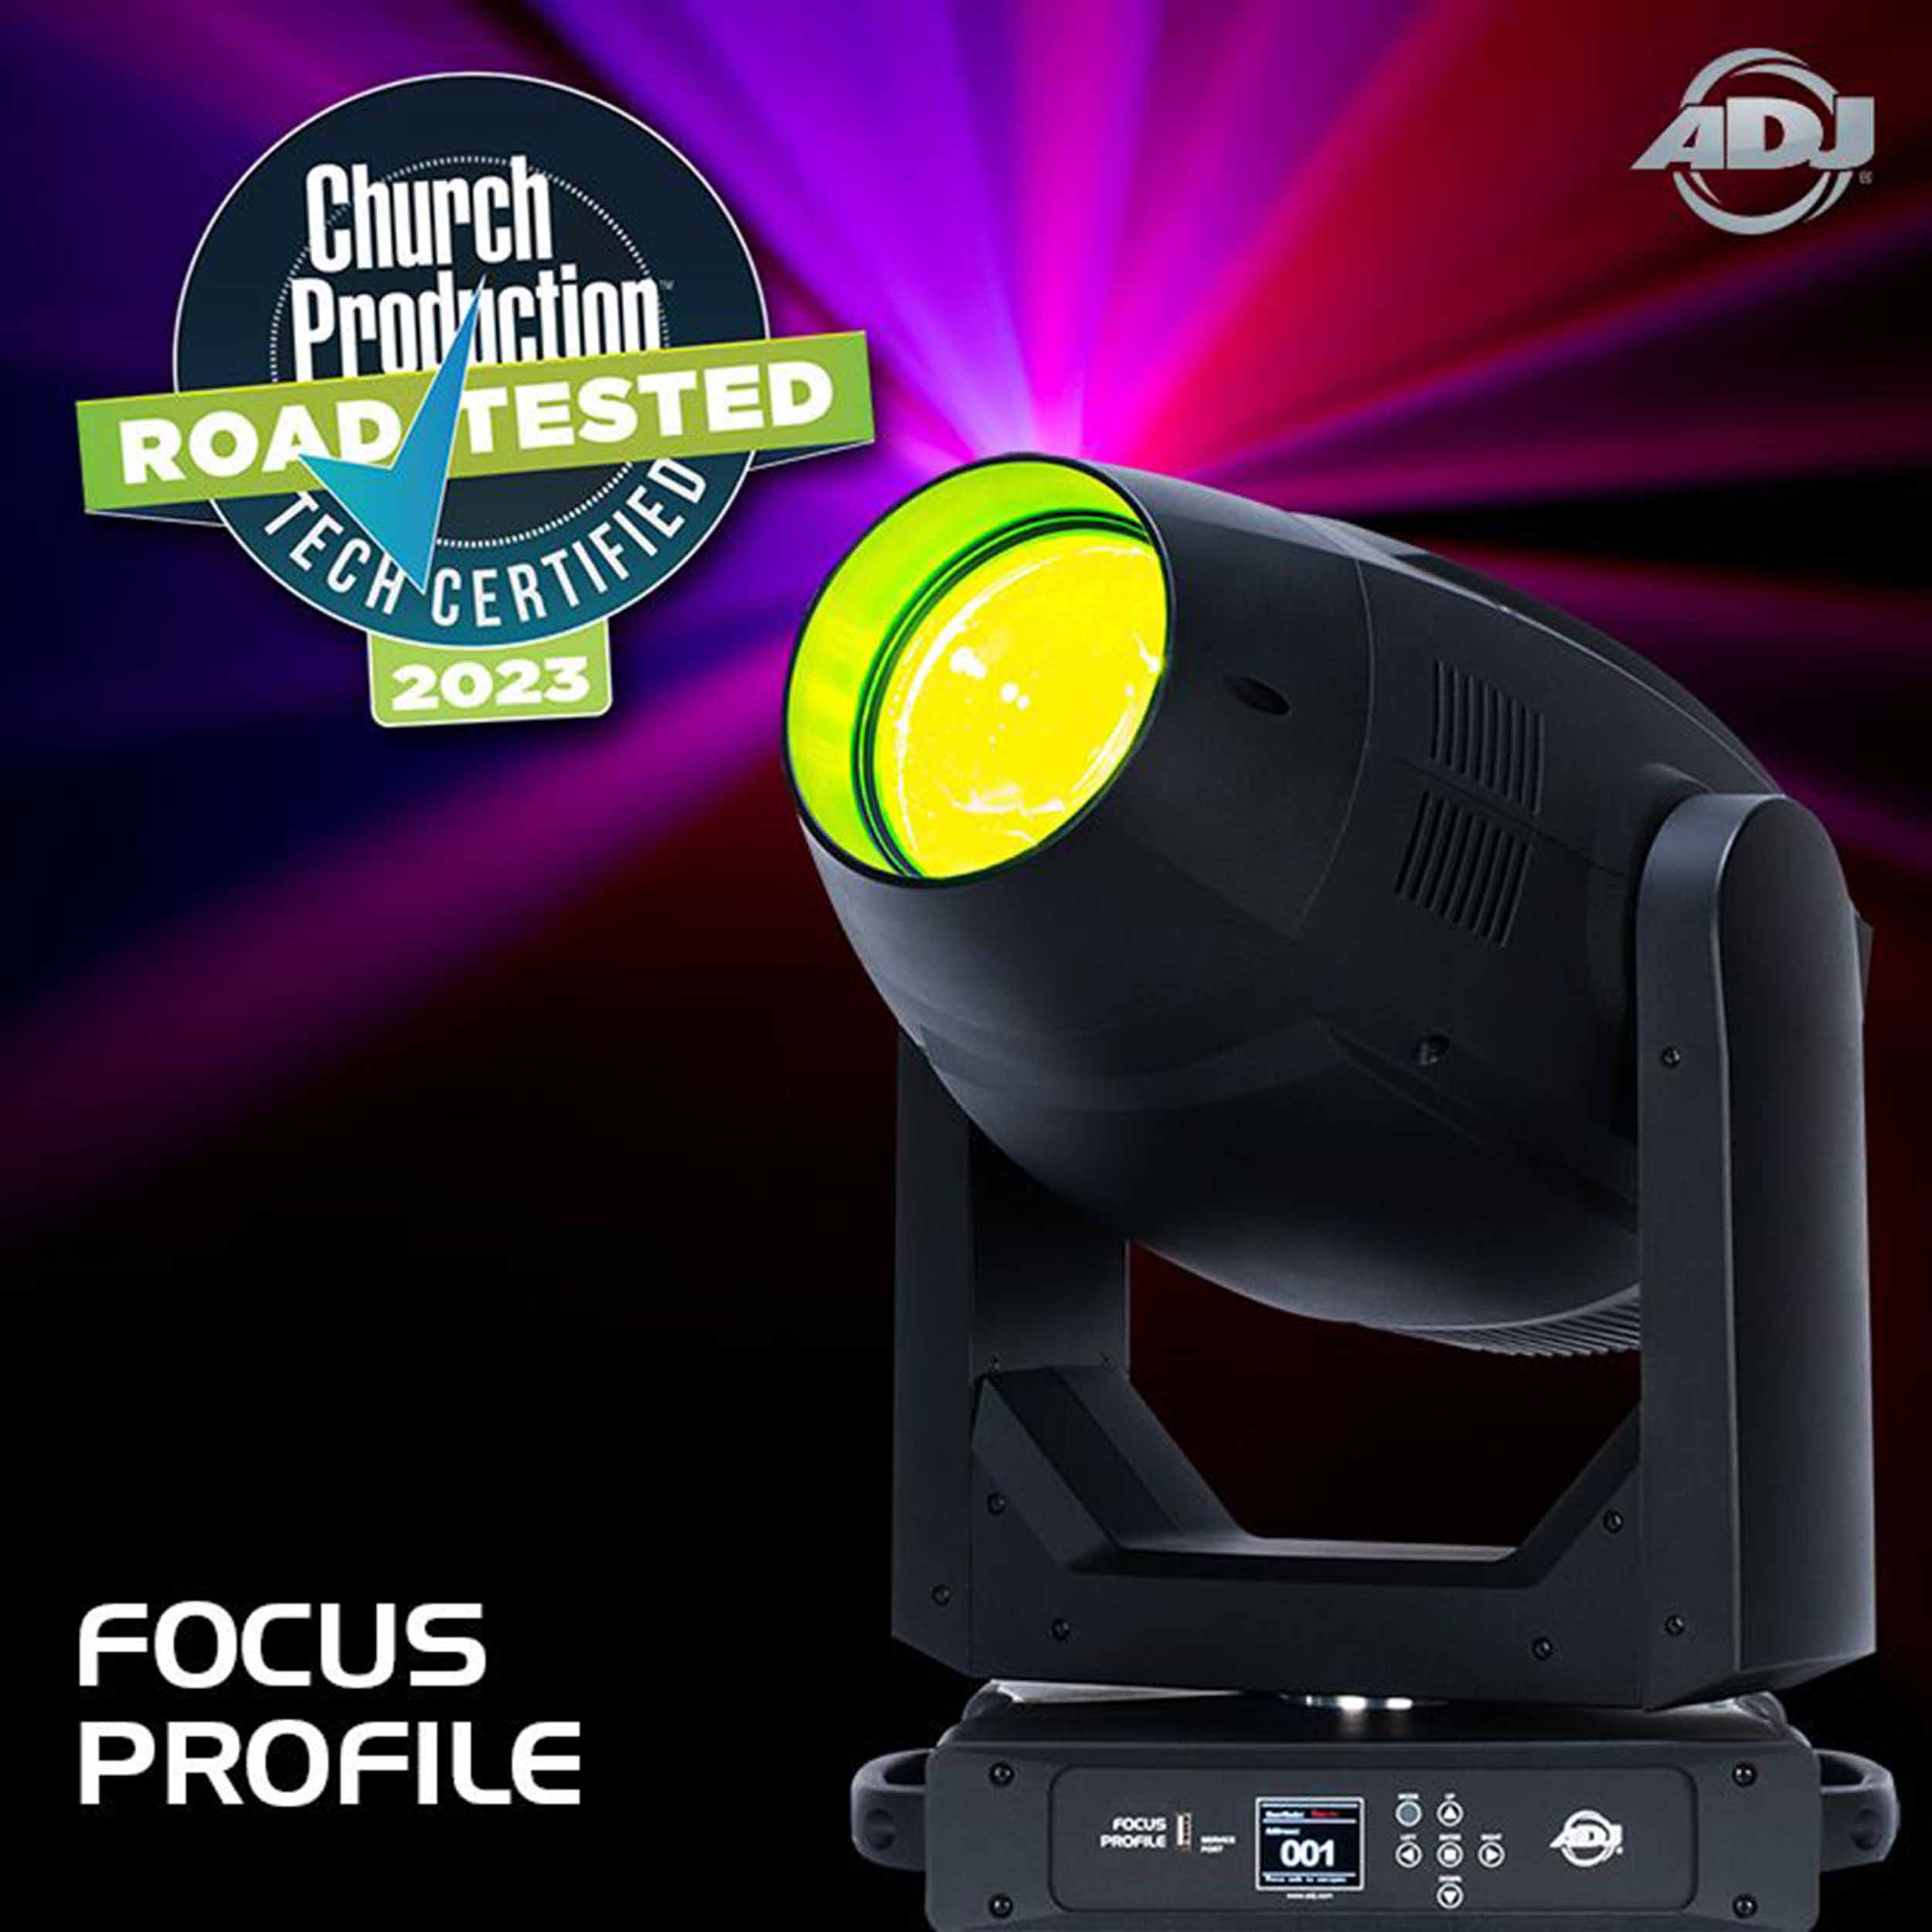 ADJ Focus Profile, Feature-Packed Moving Head Profile Fixture with Framing Shutters - 400 Watt by ADJ